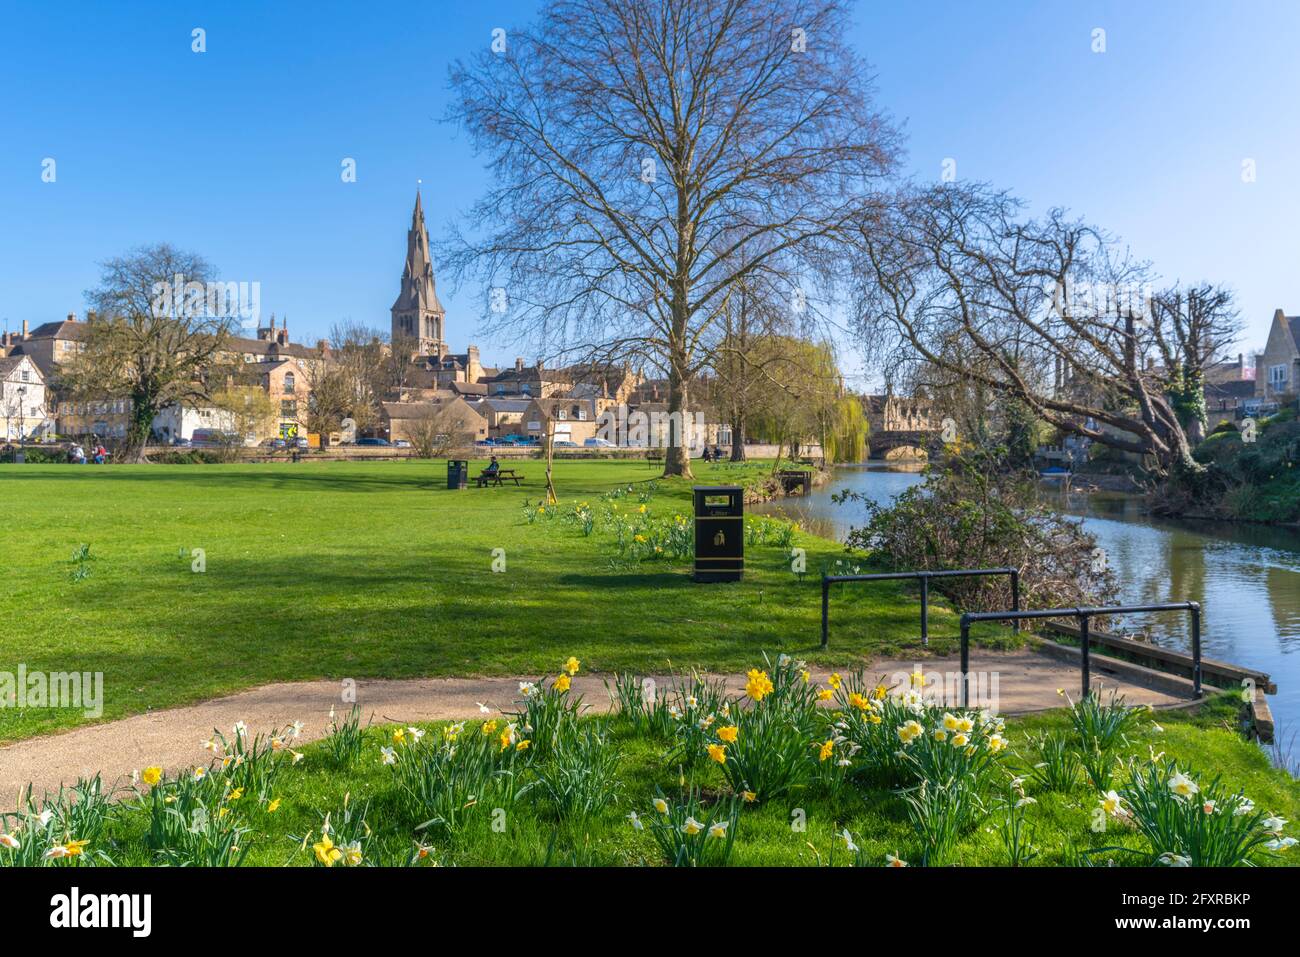 View of Welland River and All Saints Church from the Town Meadows, Stamford, South Kesteven, Lincolnshire, England, United Kingdom, Europe Stock Photo